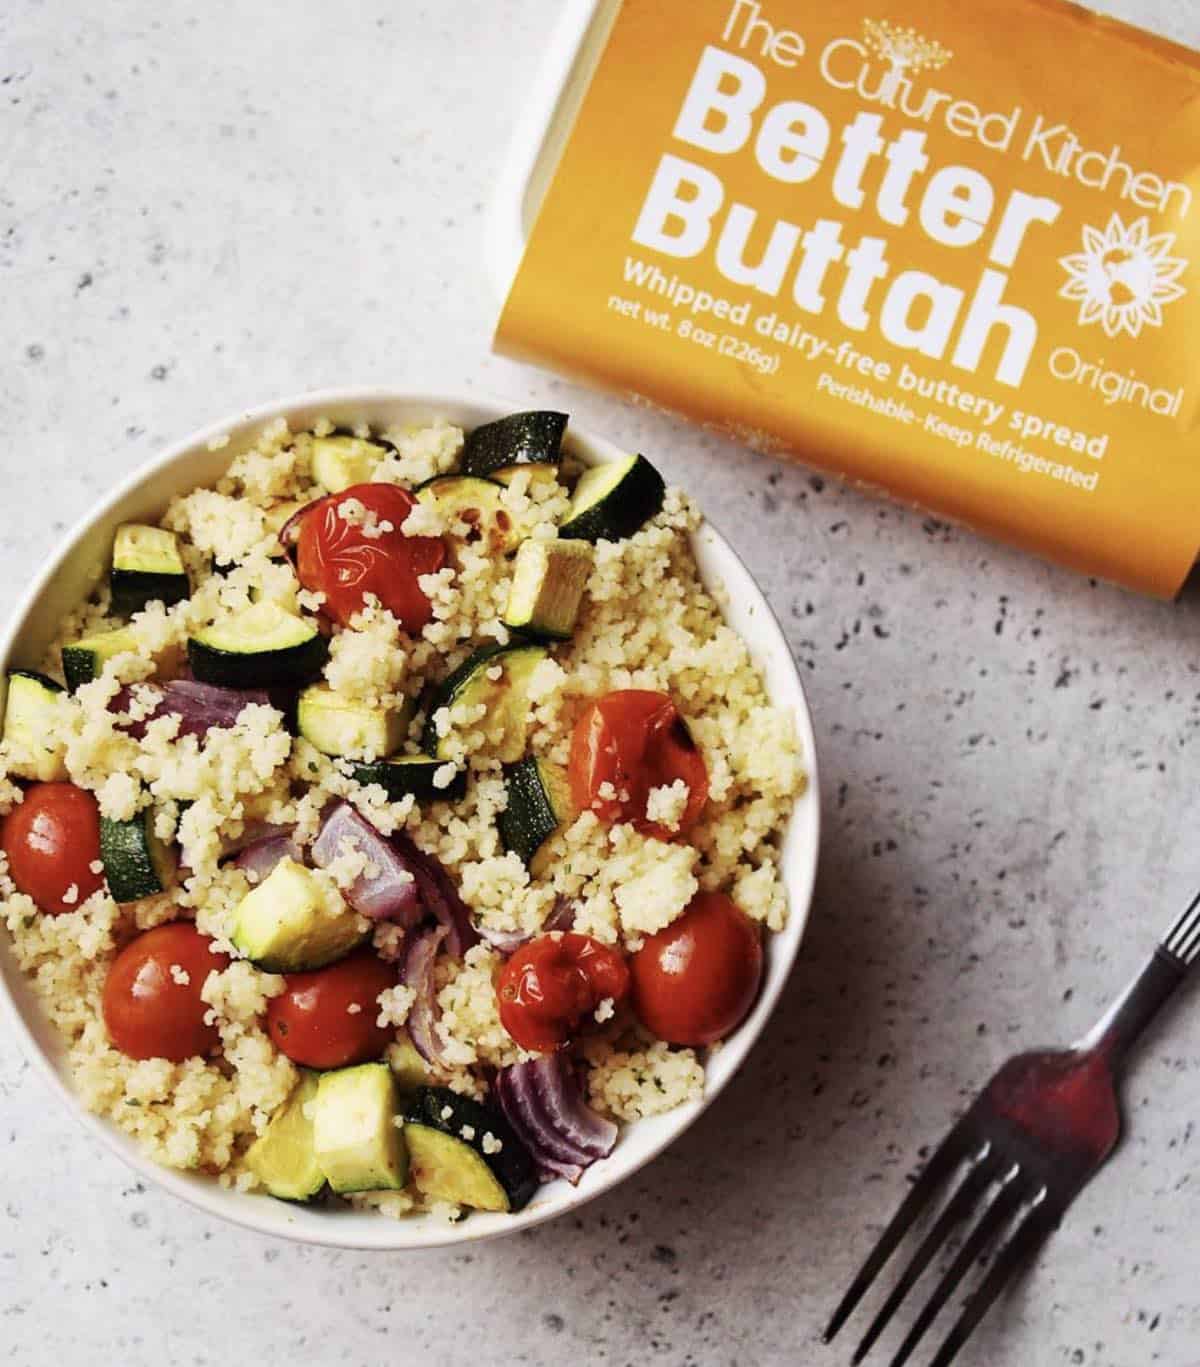 Bowl of vegan tofu scramble next to a package of dairy-free better buttah from The Cultured Kitchen.